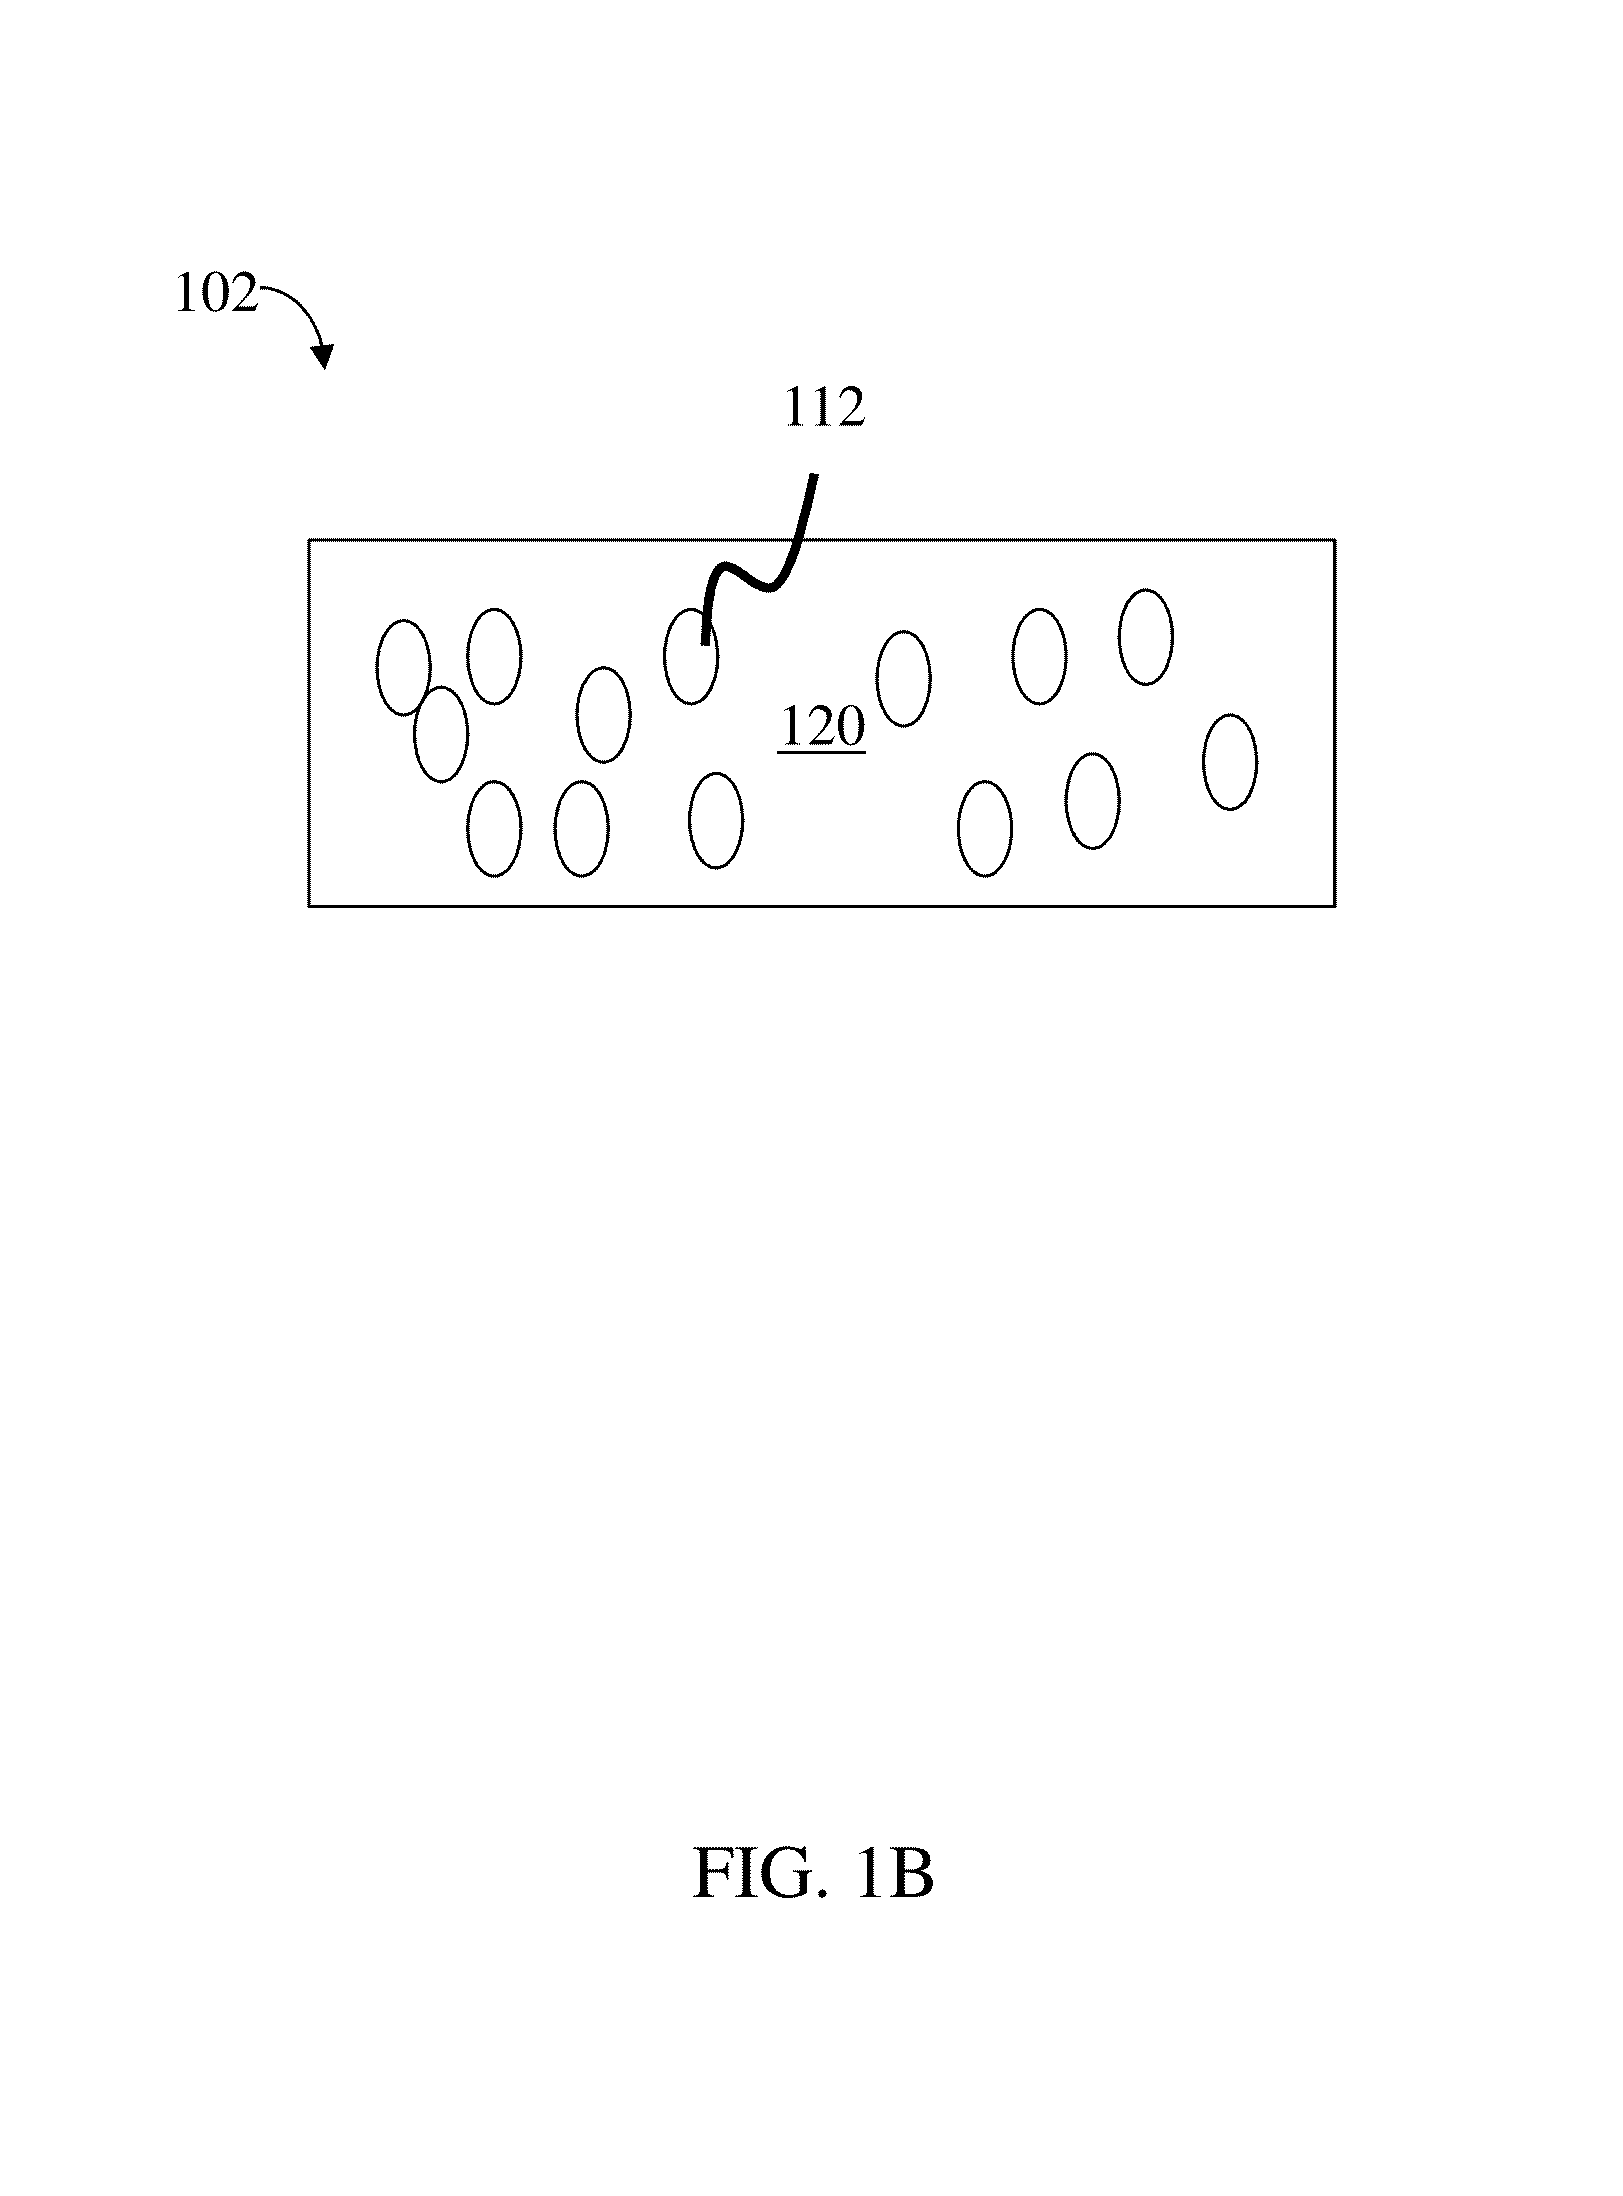 Compositions and methods for the downconversion of light